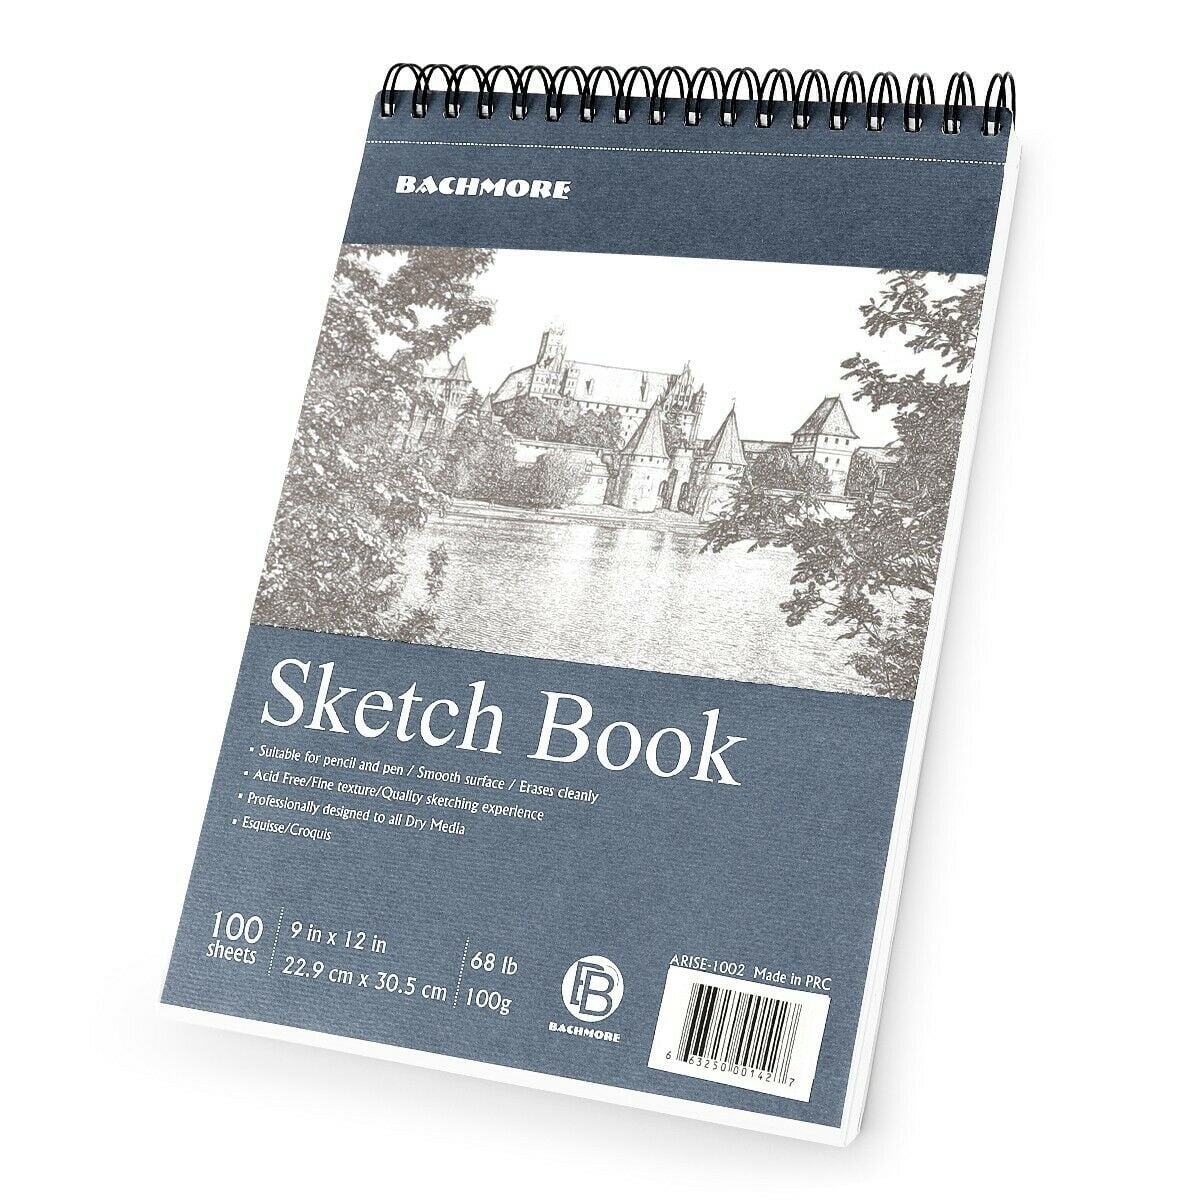 9 x 12 inches Sketch Book, Top Spiral Bound Sketch Pad, 1 Pack 100-Sheets  (68lb/100gsm), Acid Free Art Sketchbook Artistic Drawing Painting Writing